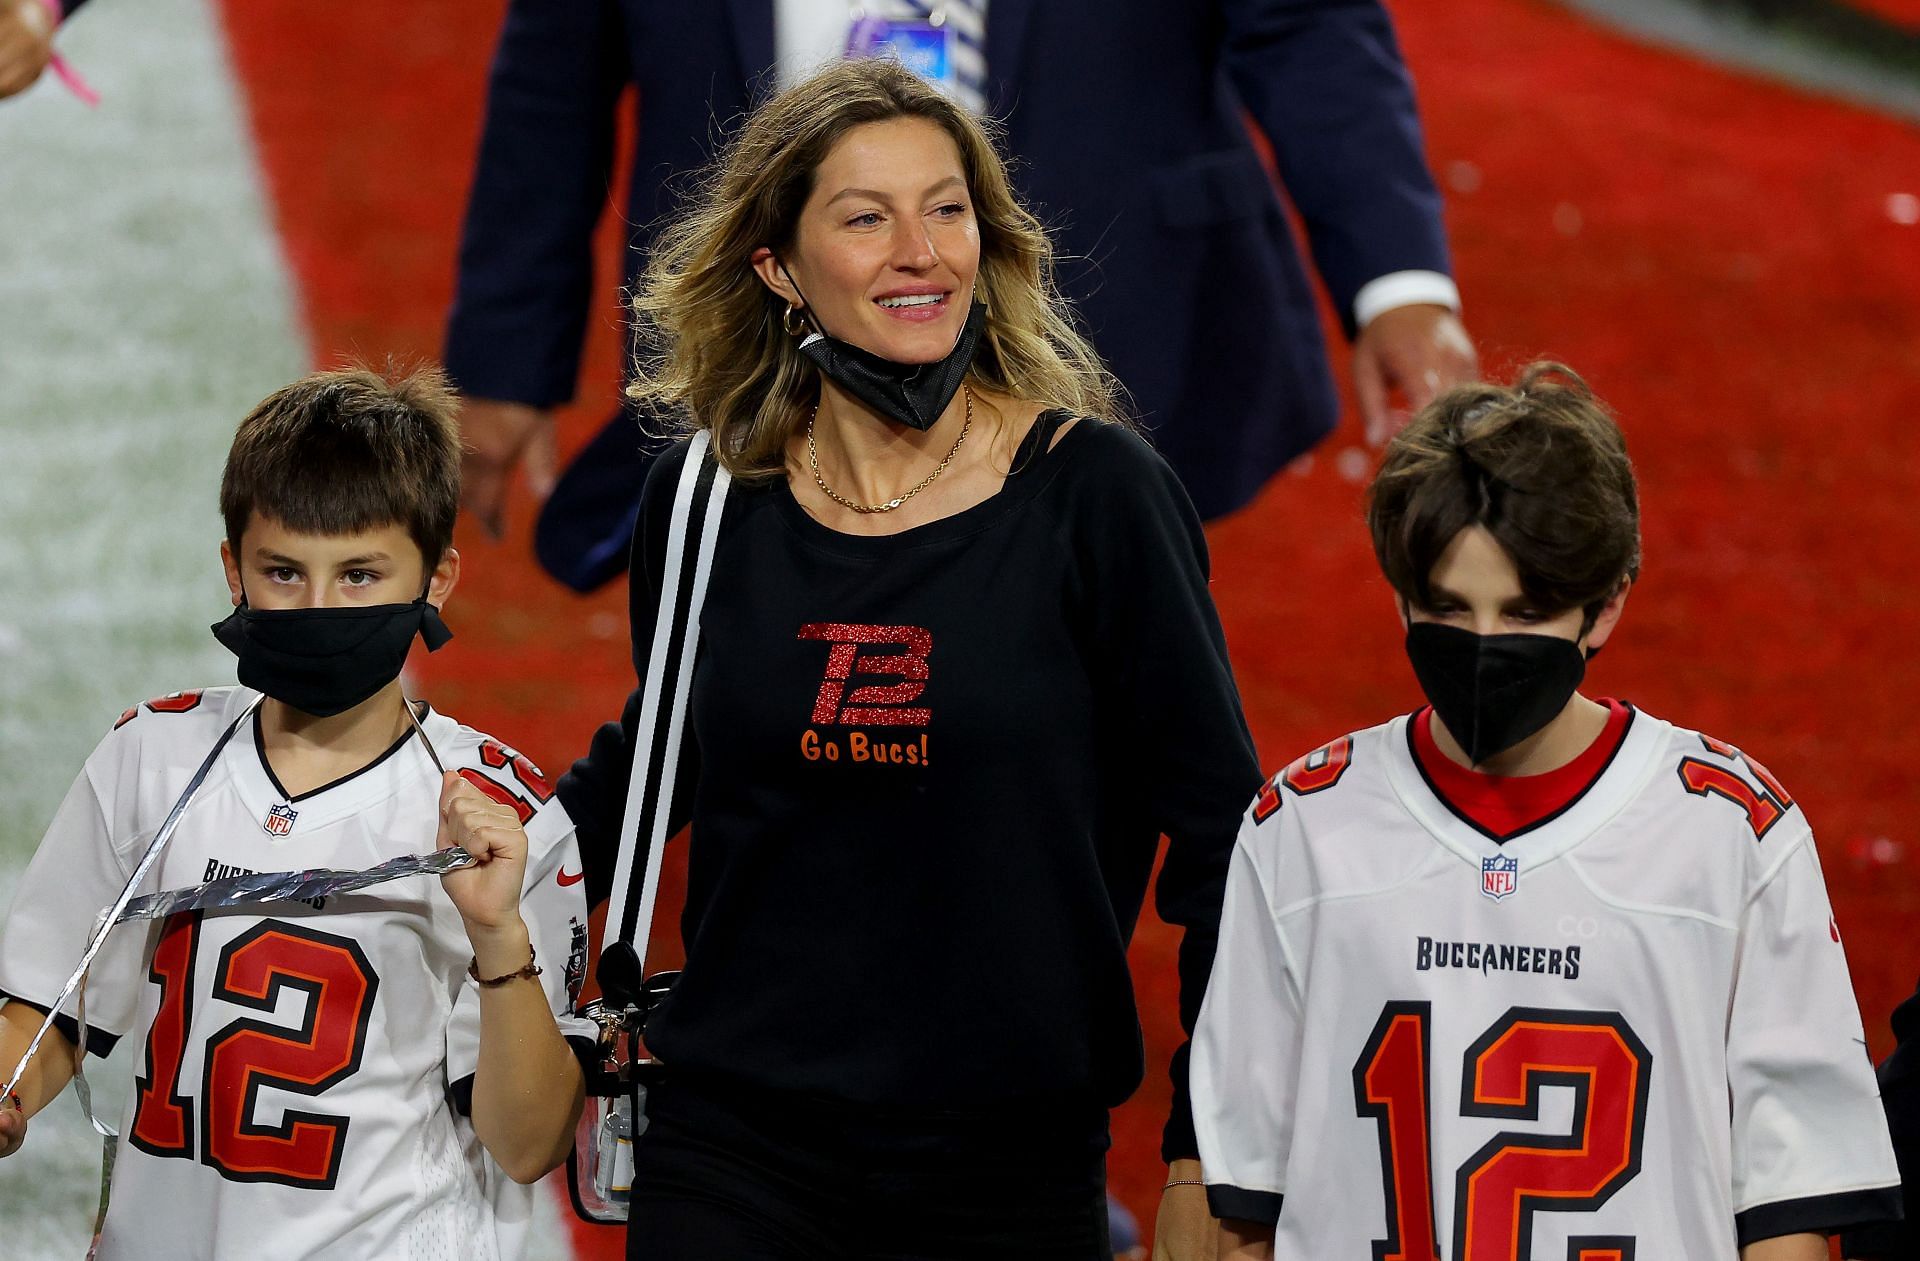 Gisele on the field right after Super Bowl LV